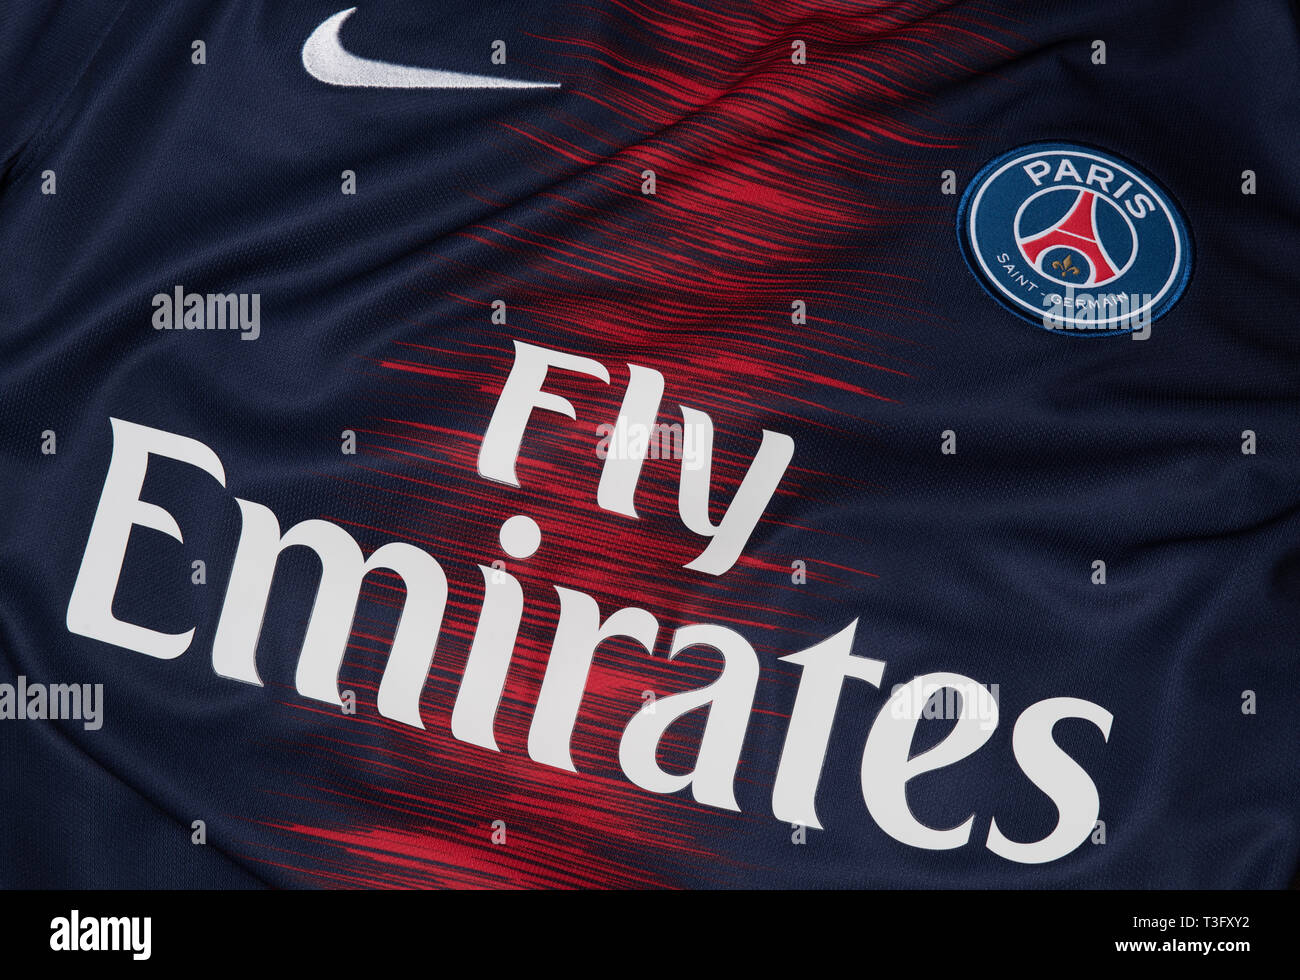 Psg fly emirates hi-res stock photography and images - Alamy